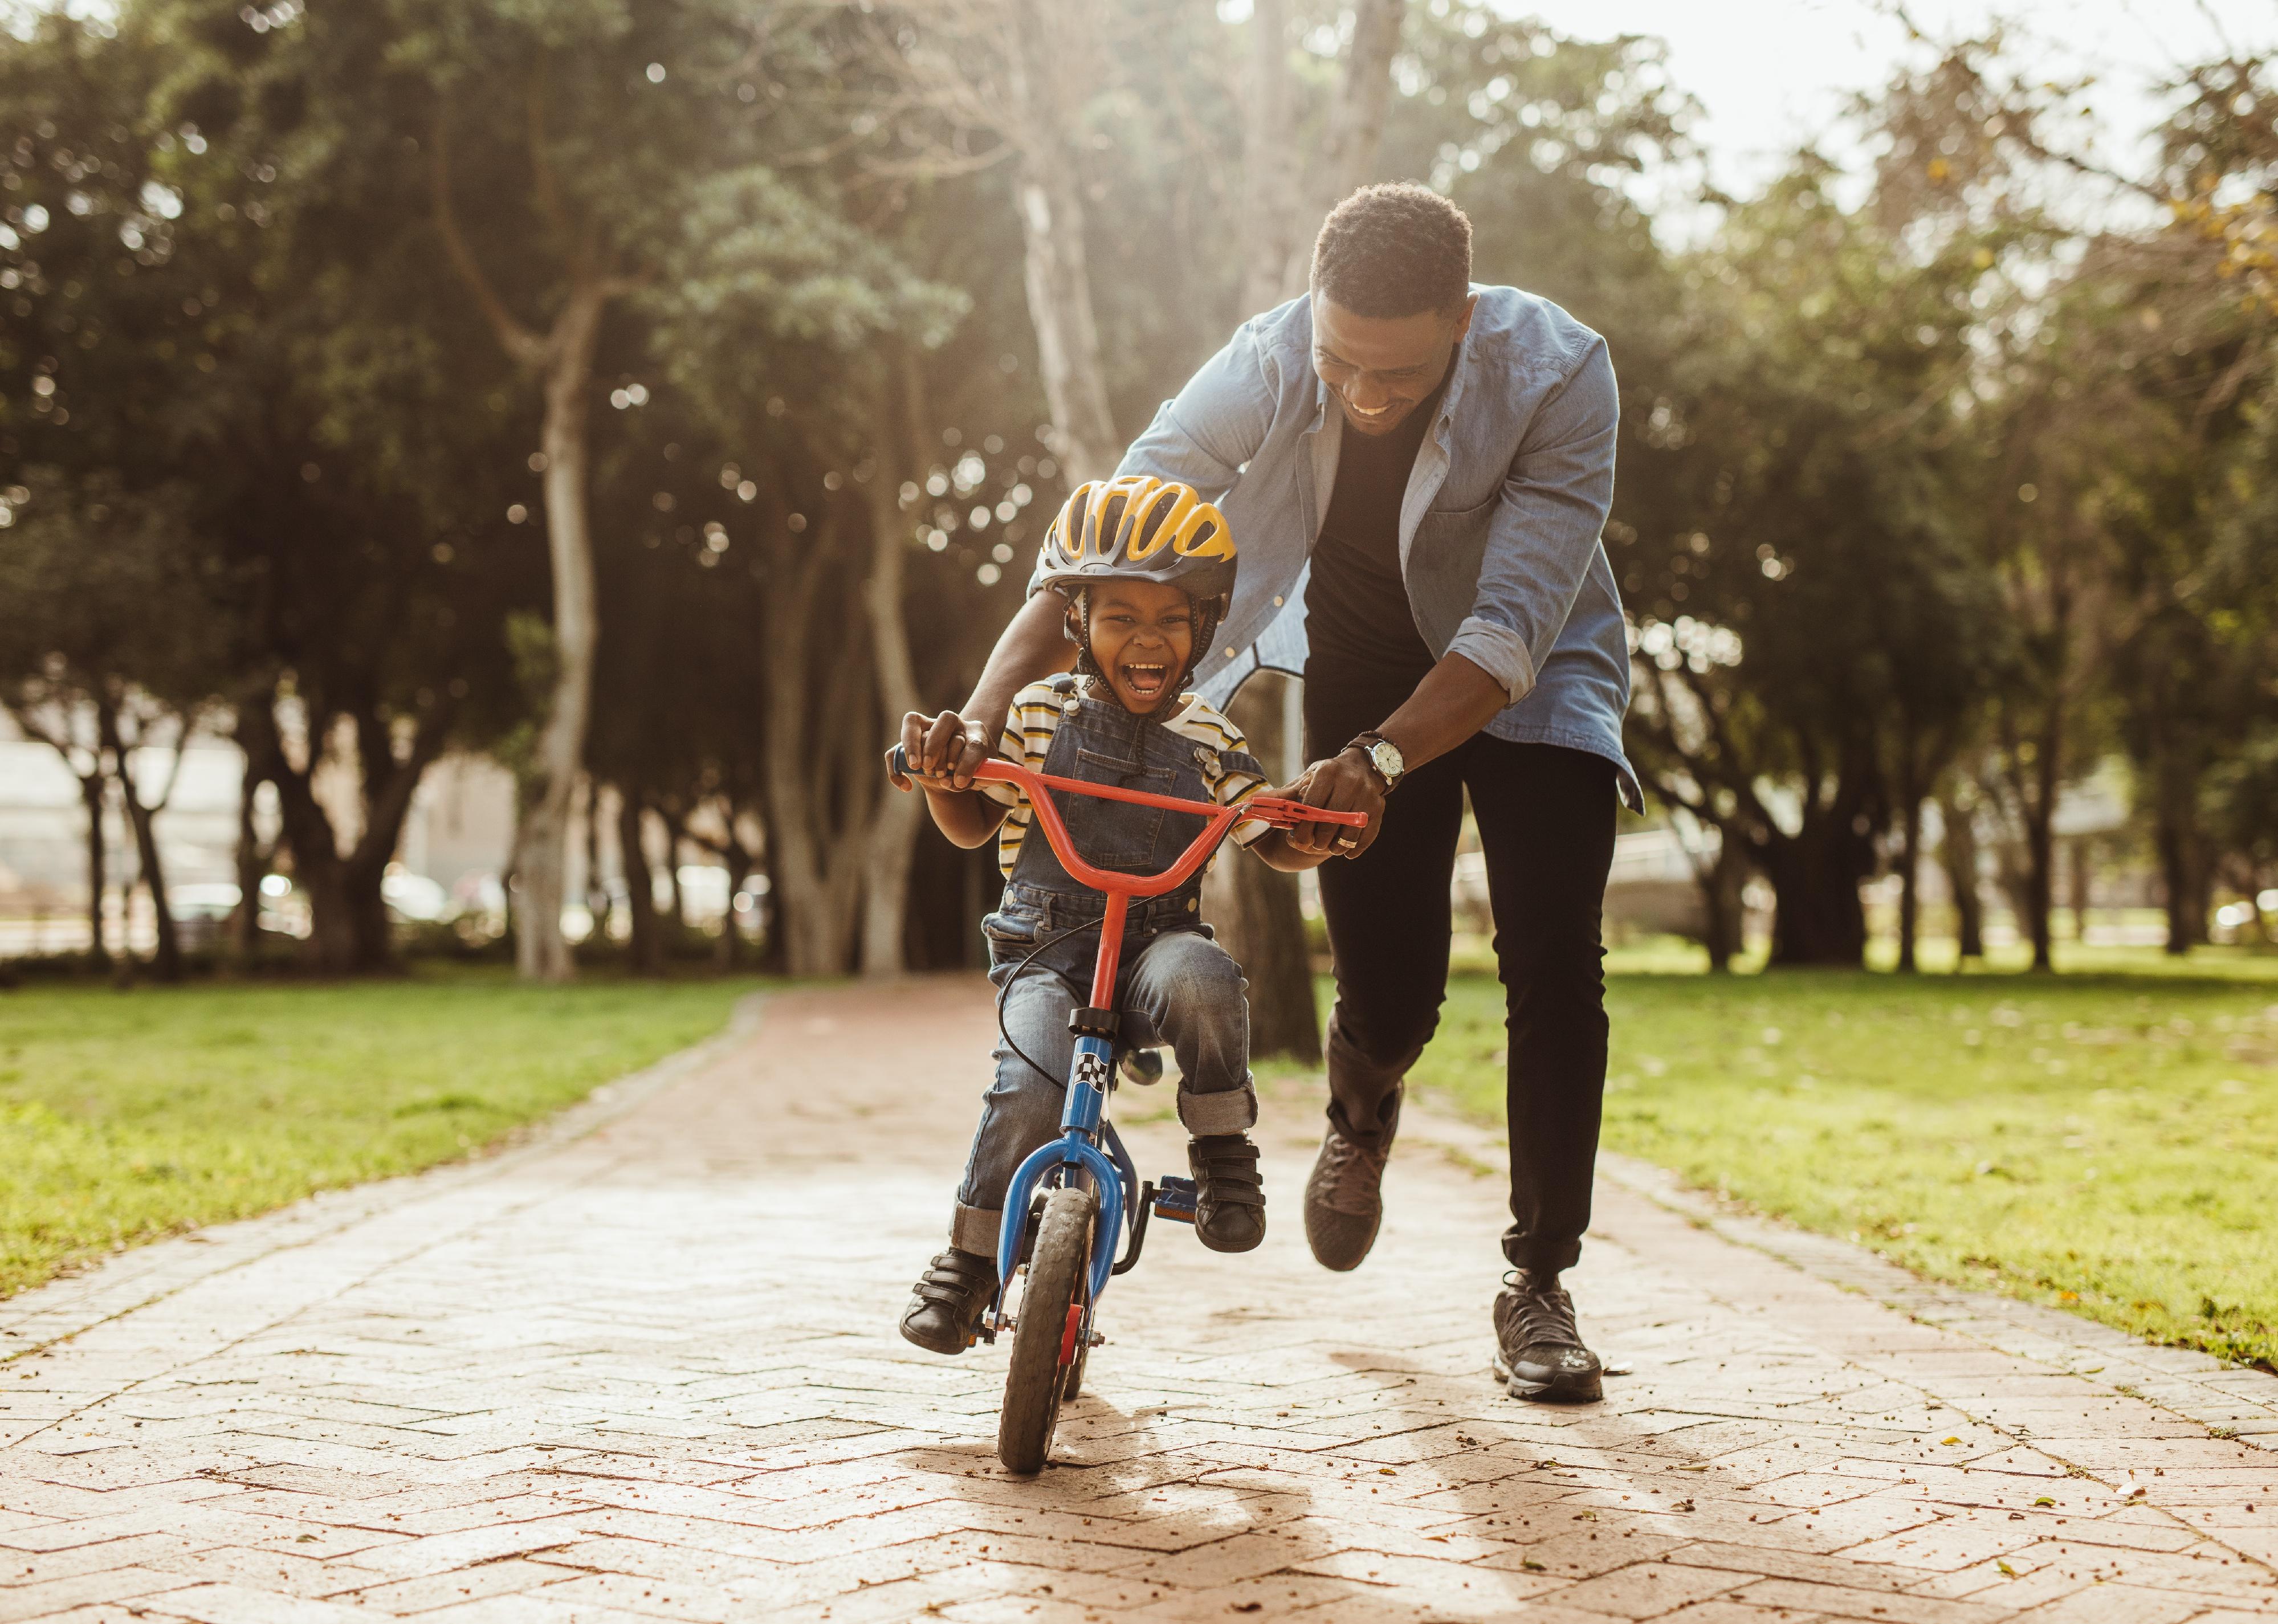 Boy learning to ride a bicycle with his father in park.